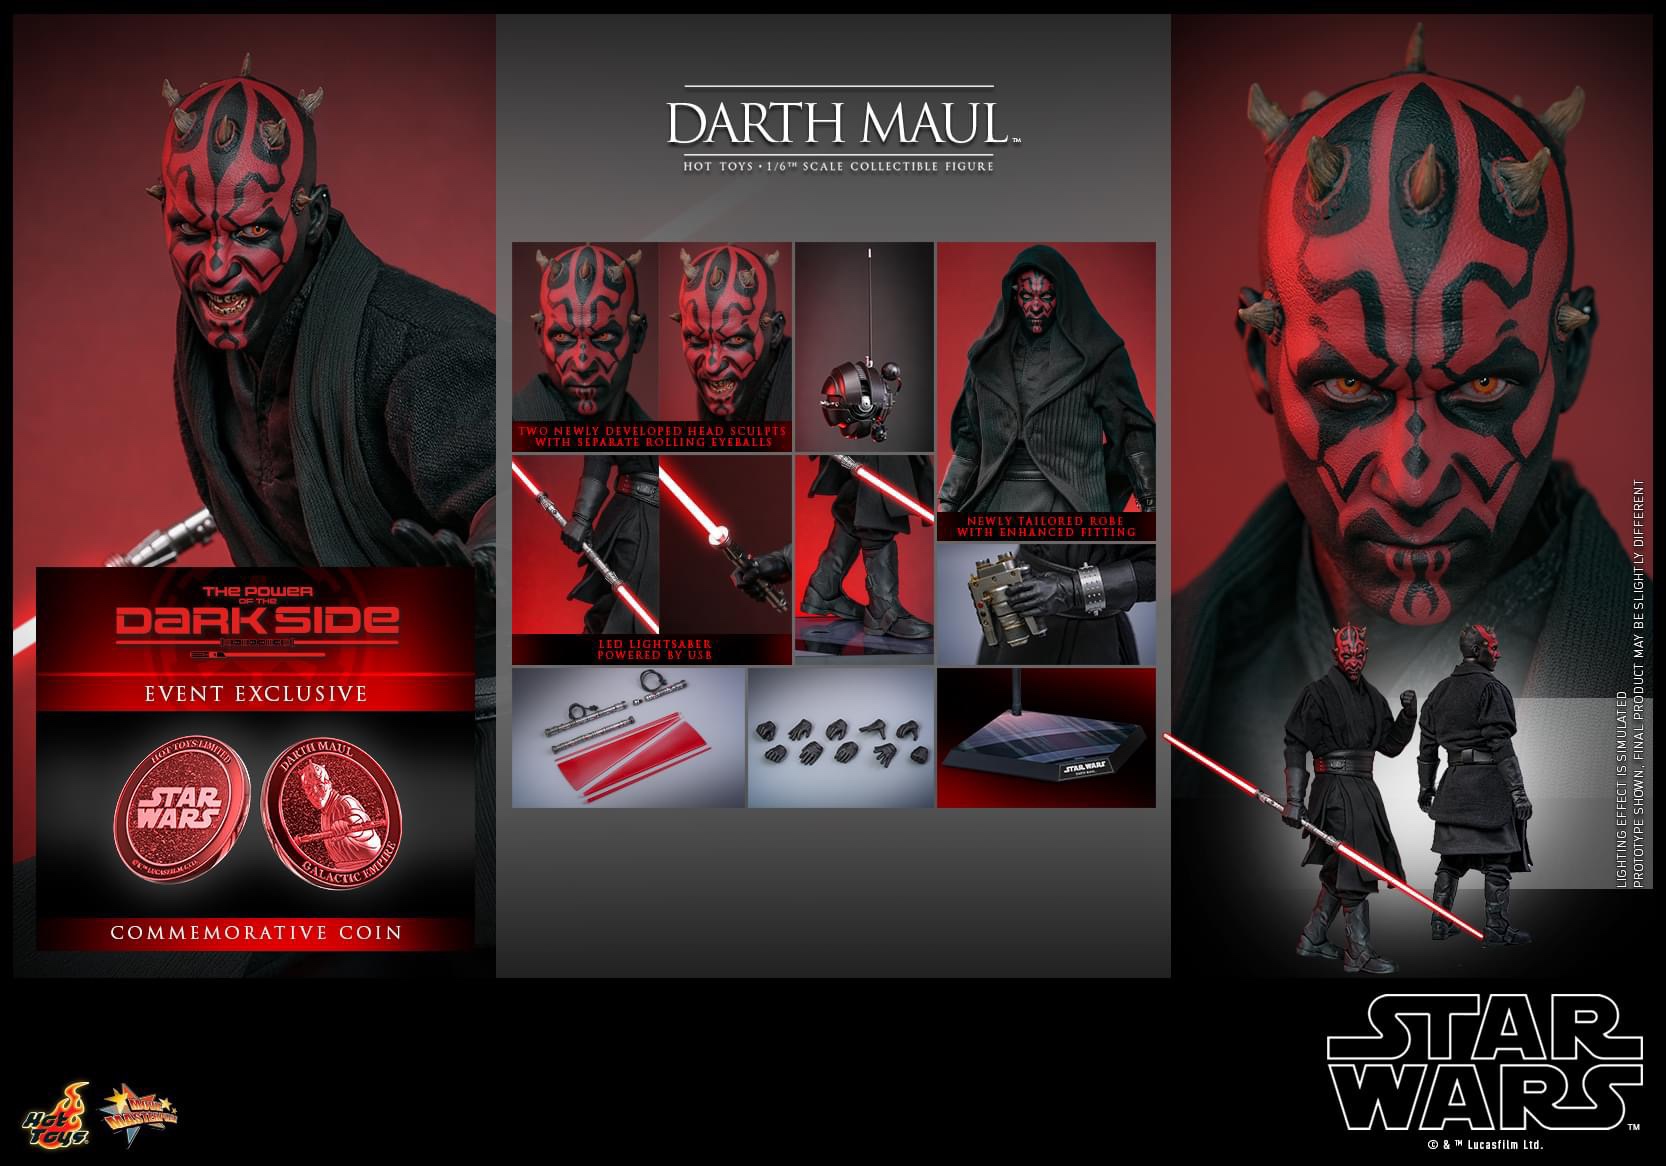 HOTTOYS Star Wars Episode I: The Phantom Menace - 1/6th scale Darth Maul Collectible Figure